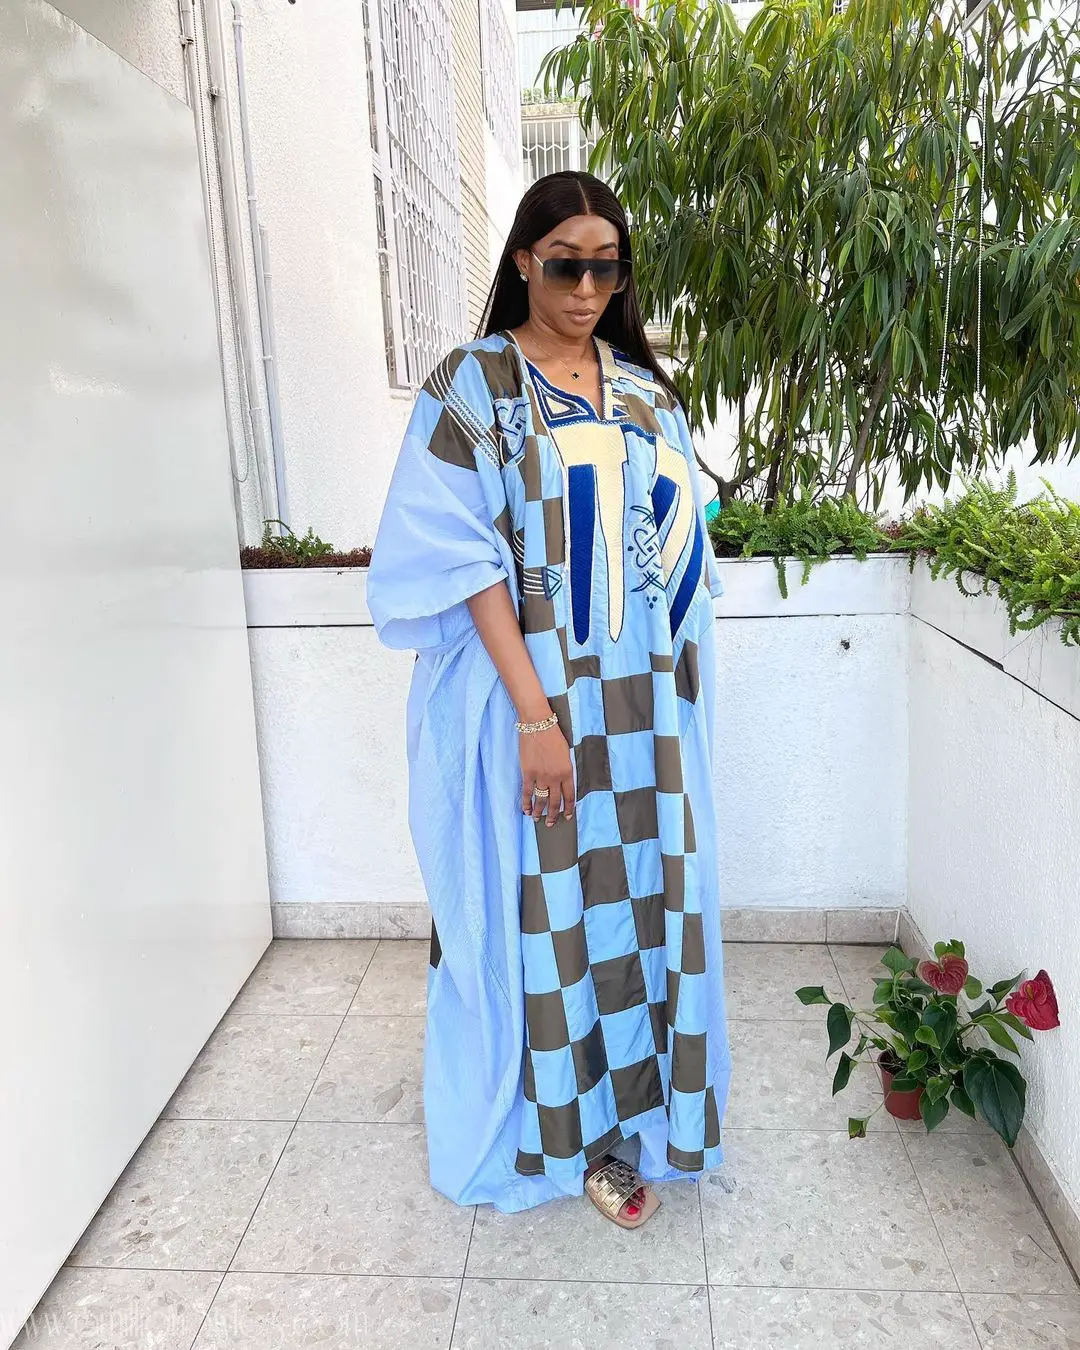 Bringing You 10 Gorgeous Rich Aunty Styles